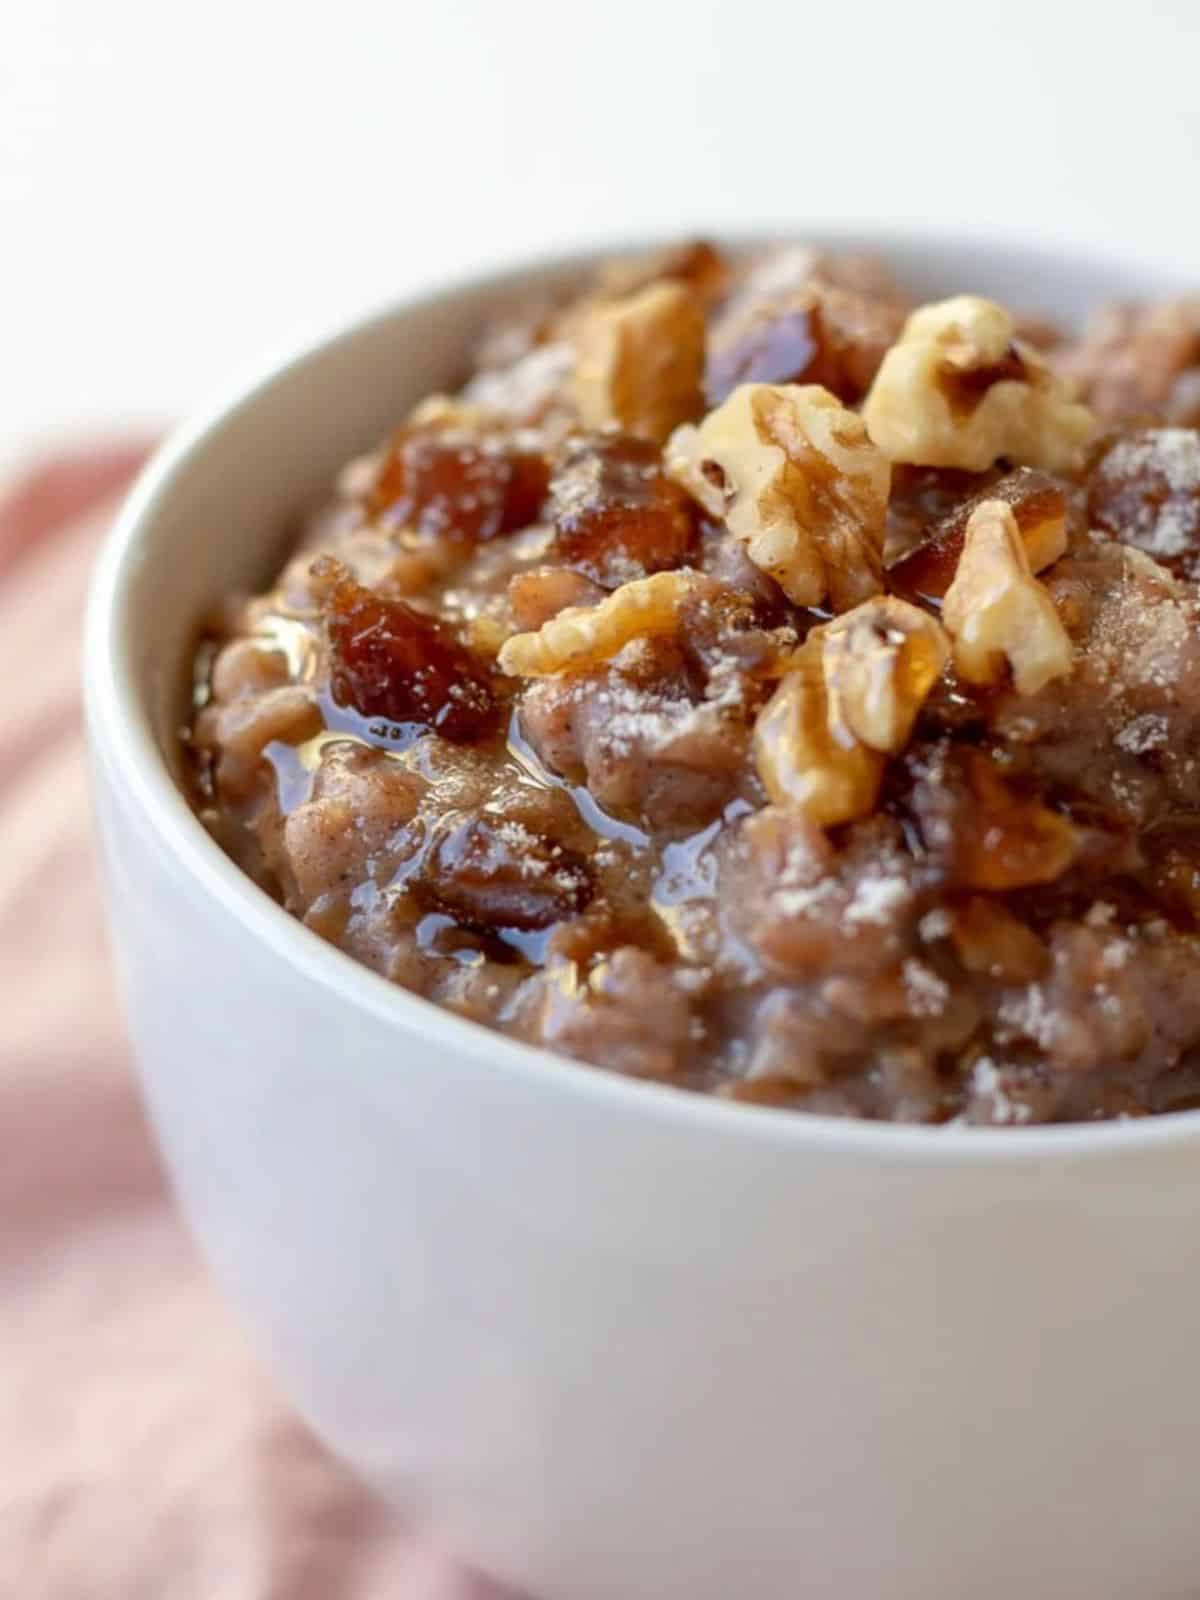 Farro Pudding with Dates and Cardamom in a bowl.